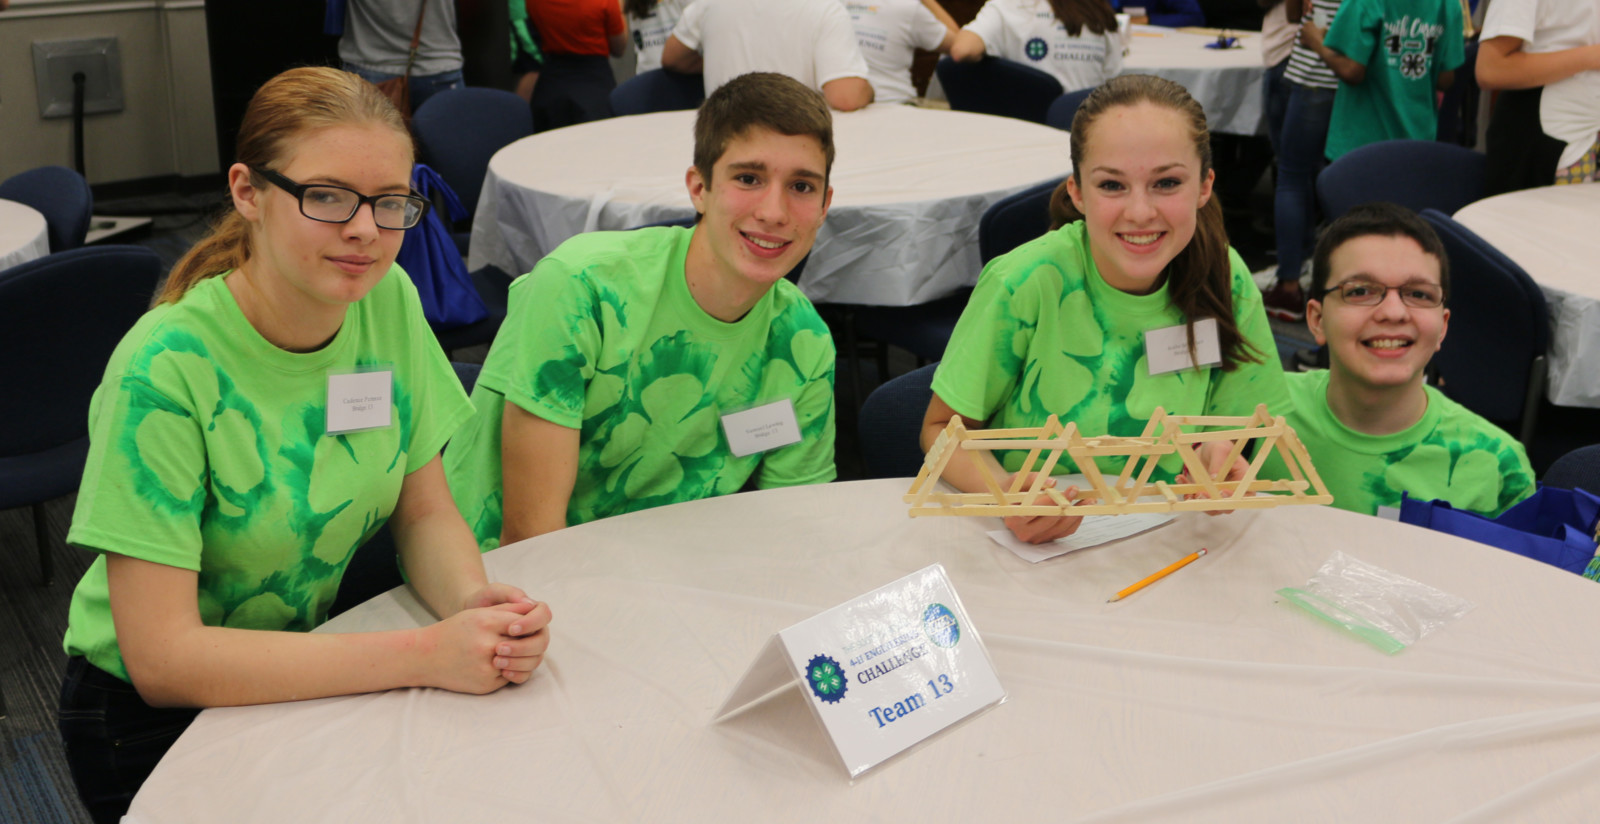 4-H Engineering Challenge team prepares to compete in Building a Bridge competition.